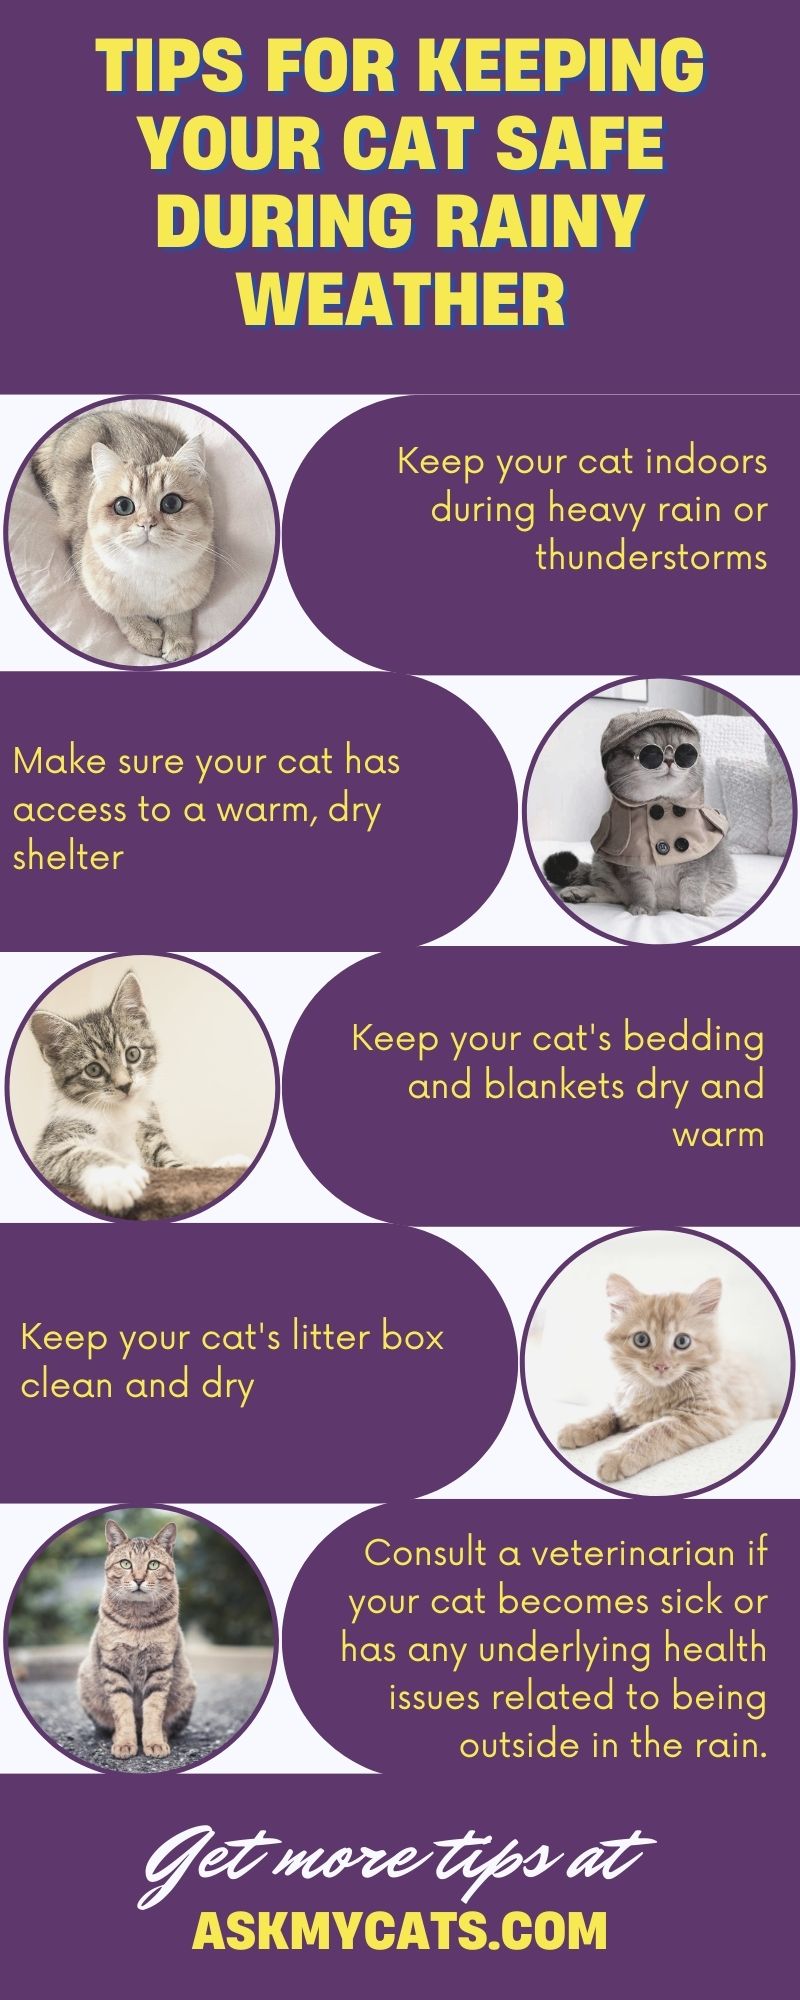 Tips for Keeping Your Cat Safe During Rainy Weather